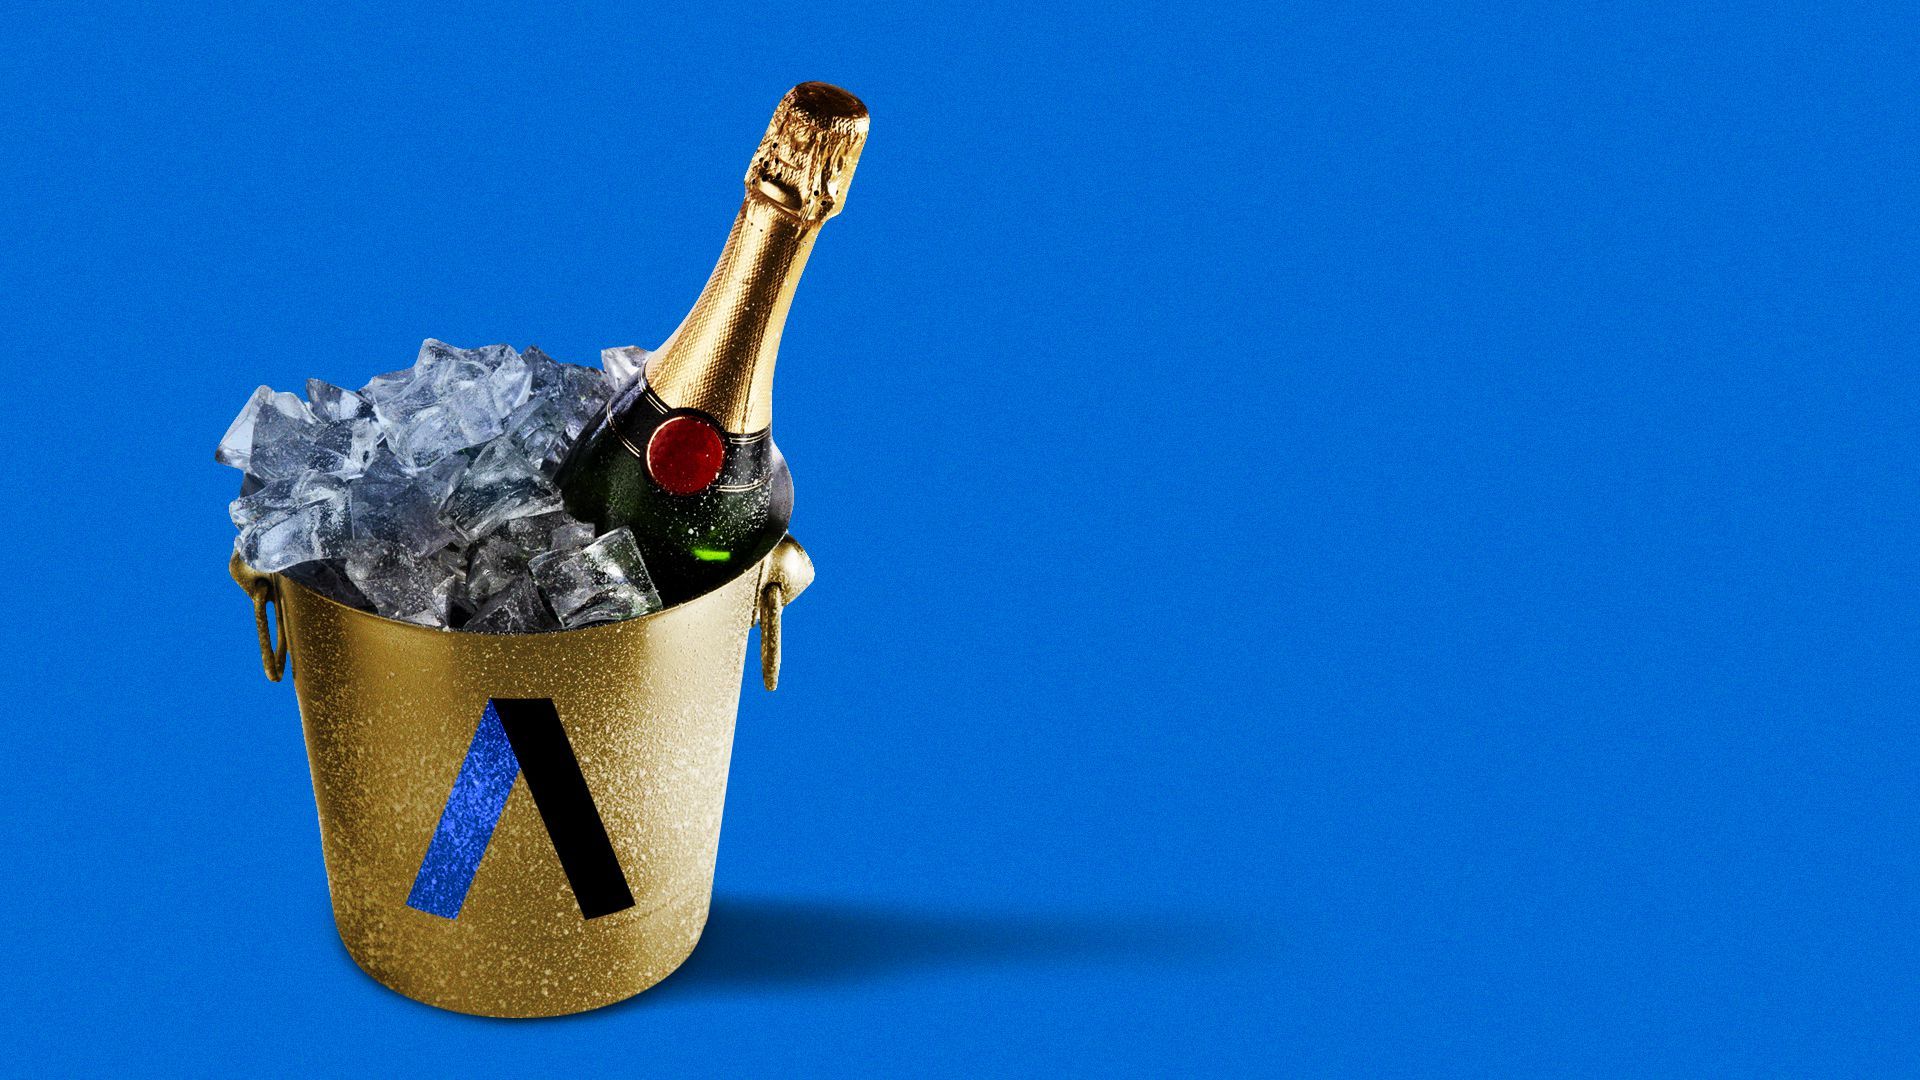 Illustration of a champagne bottle in a gold cooler with the Axios logo.